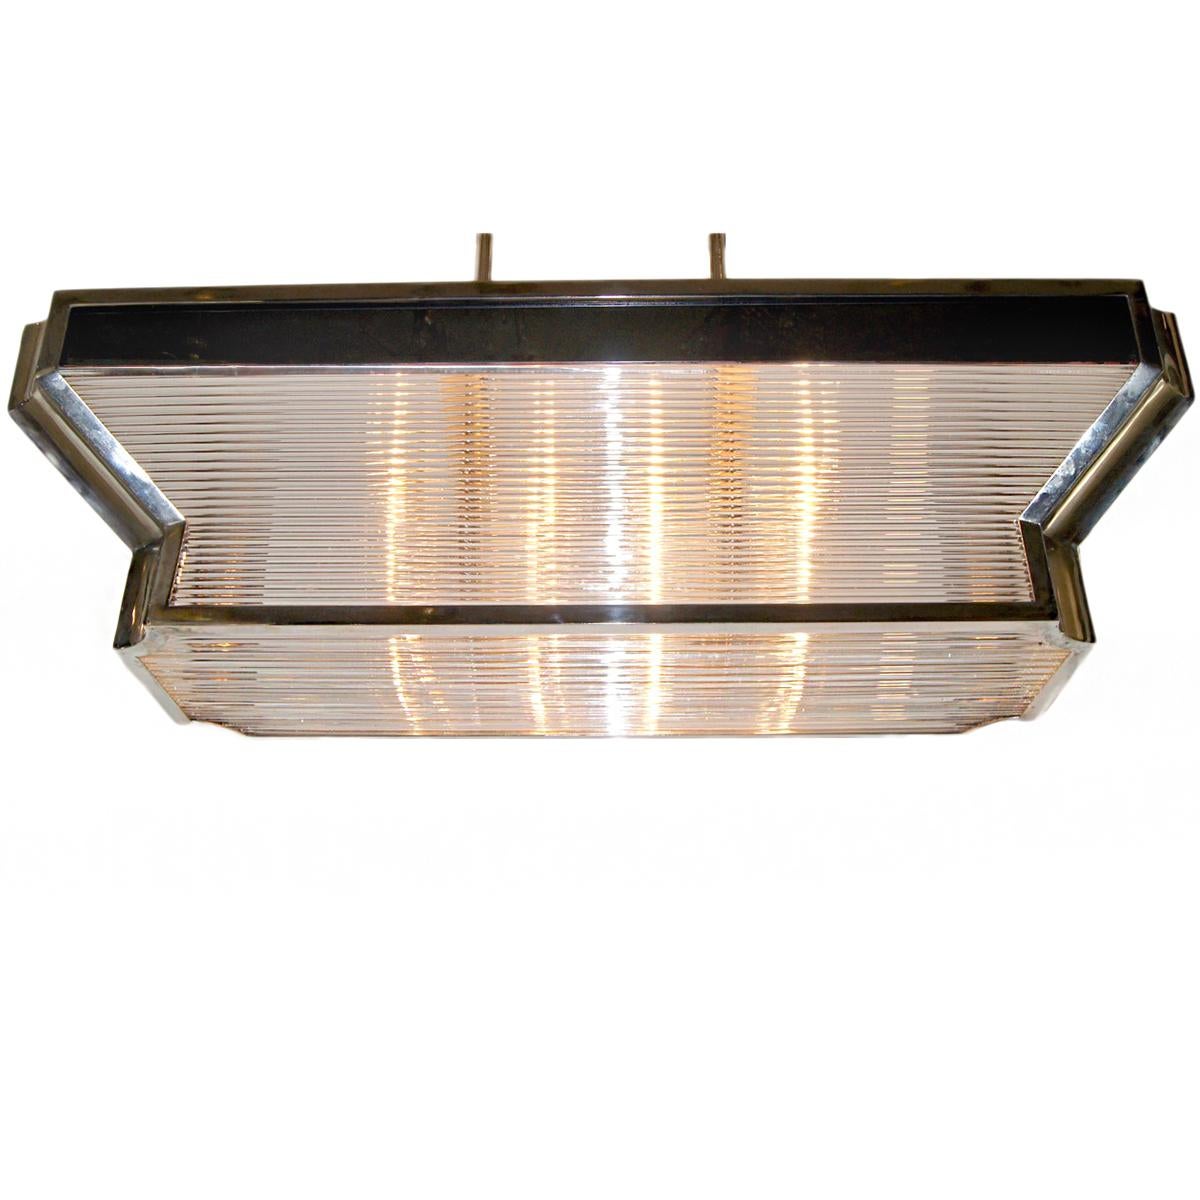 A circa 1950's French Art Deco style chrome and glass rods light fixture with 8 interior lights.

Measurements:
Drop: 26